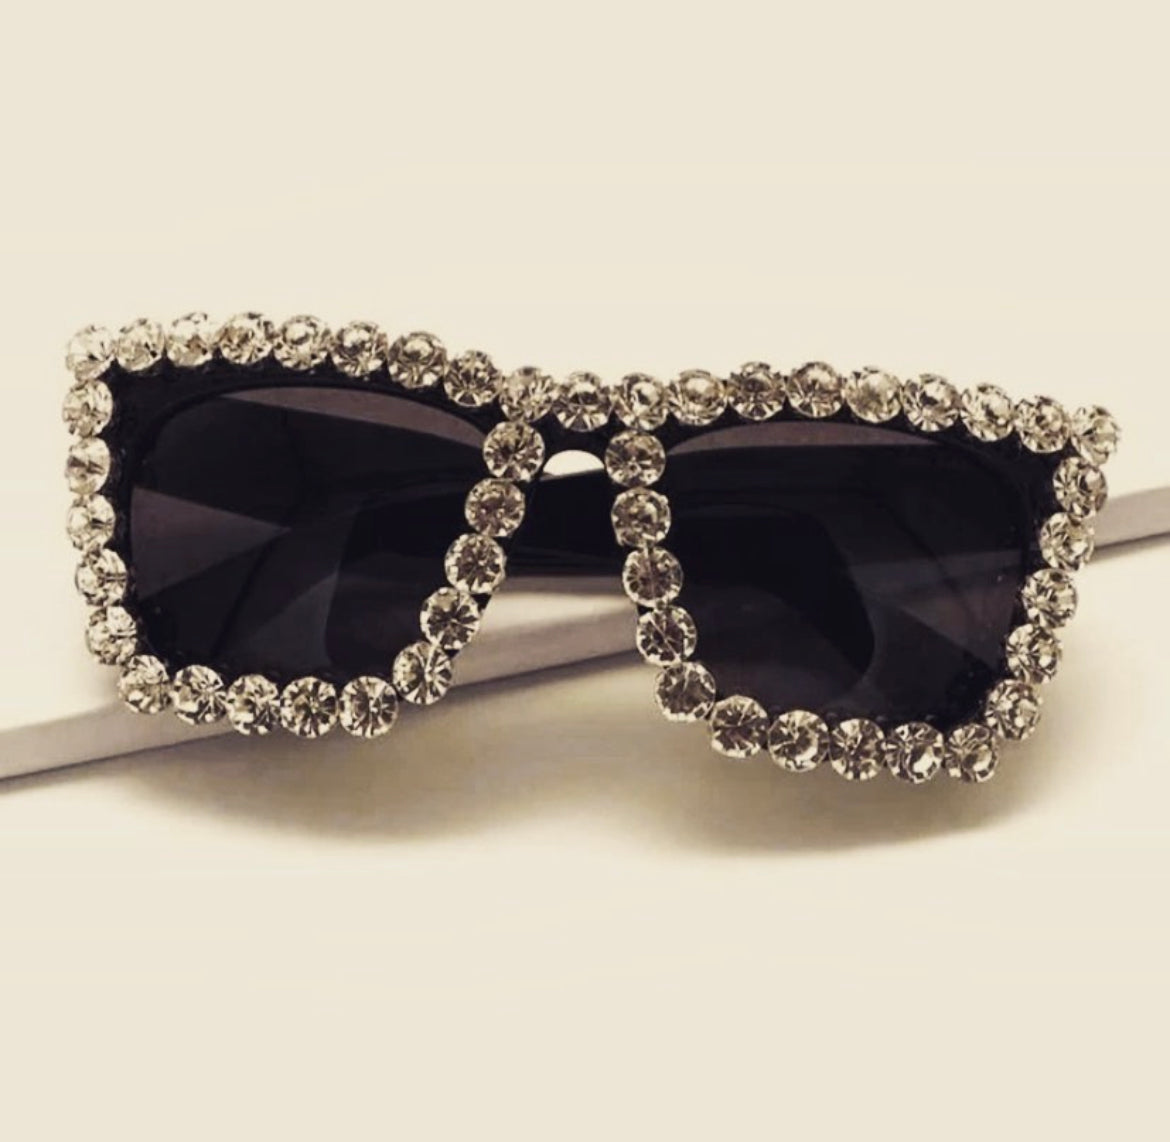 Blinged out shades